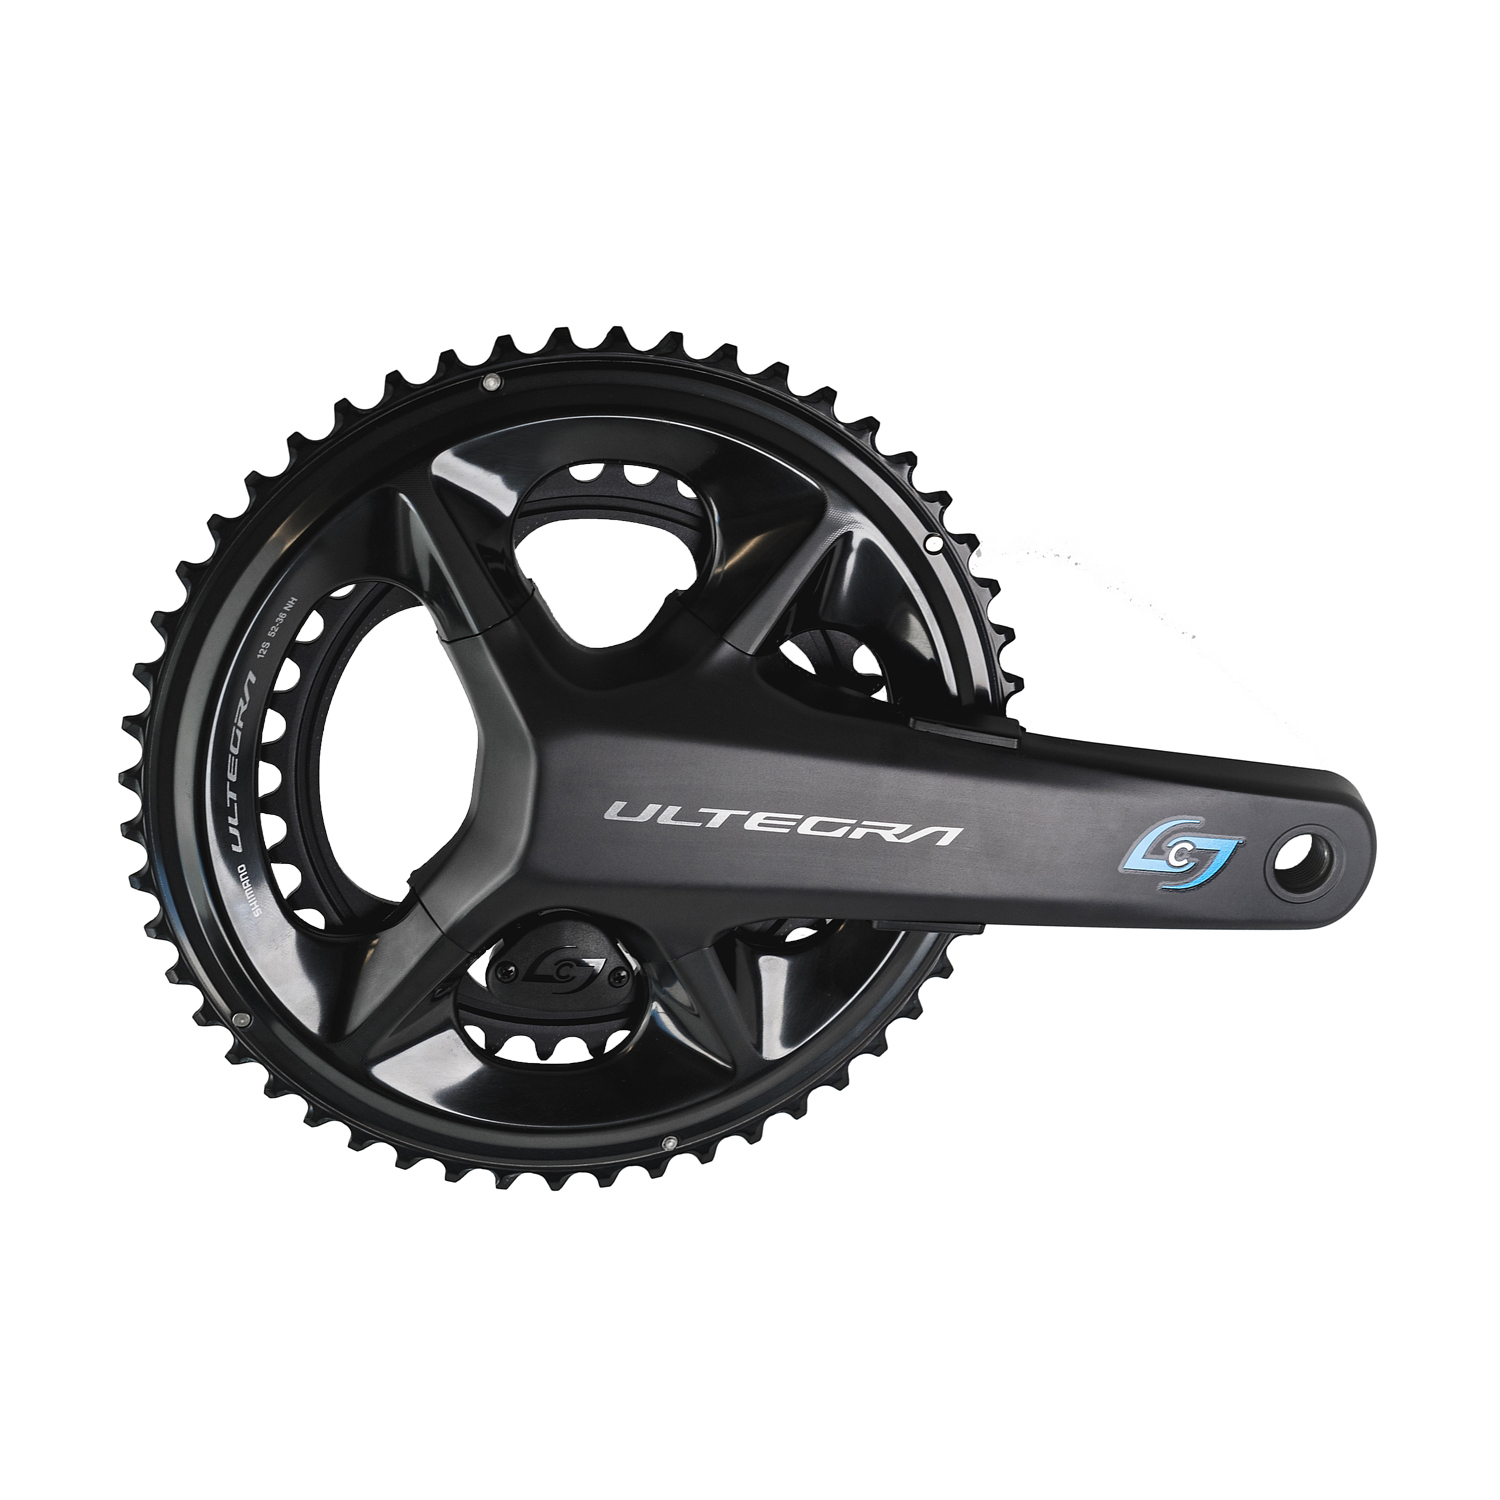 stages cycling kurbeln stages power r - shimano ultegra r8000 - 160mn 50/34 noir uomo